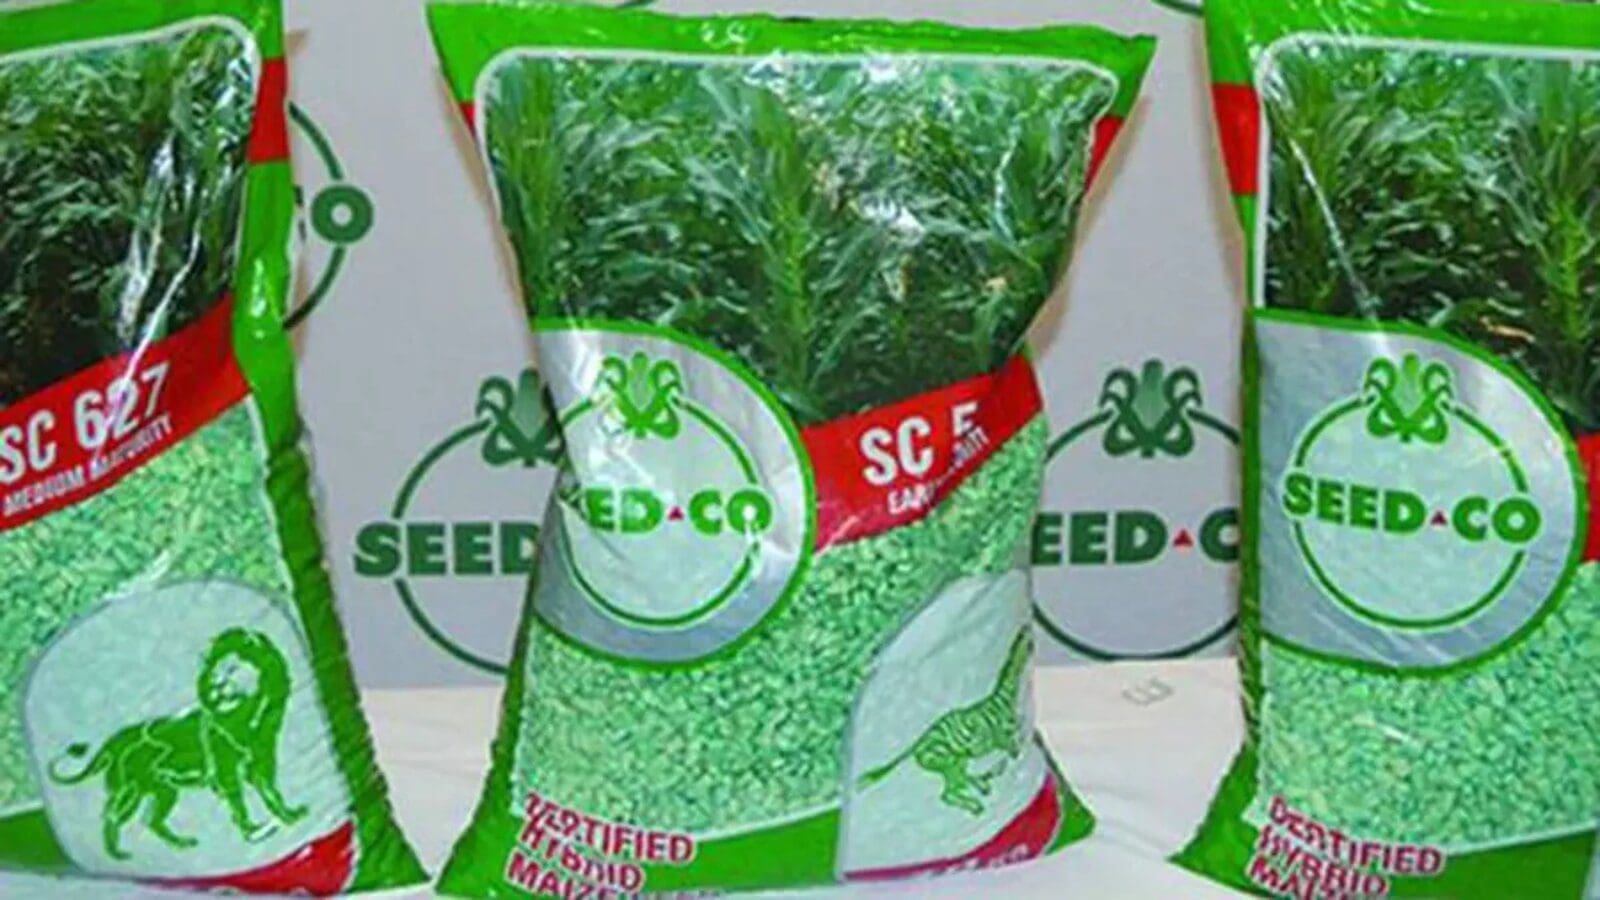 Zimbabwe’s Seed Co restructures its business model to cope with impacts of exchange losses